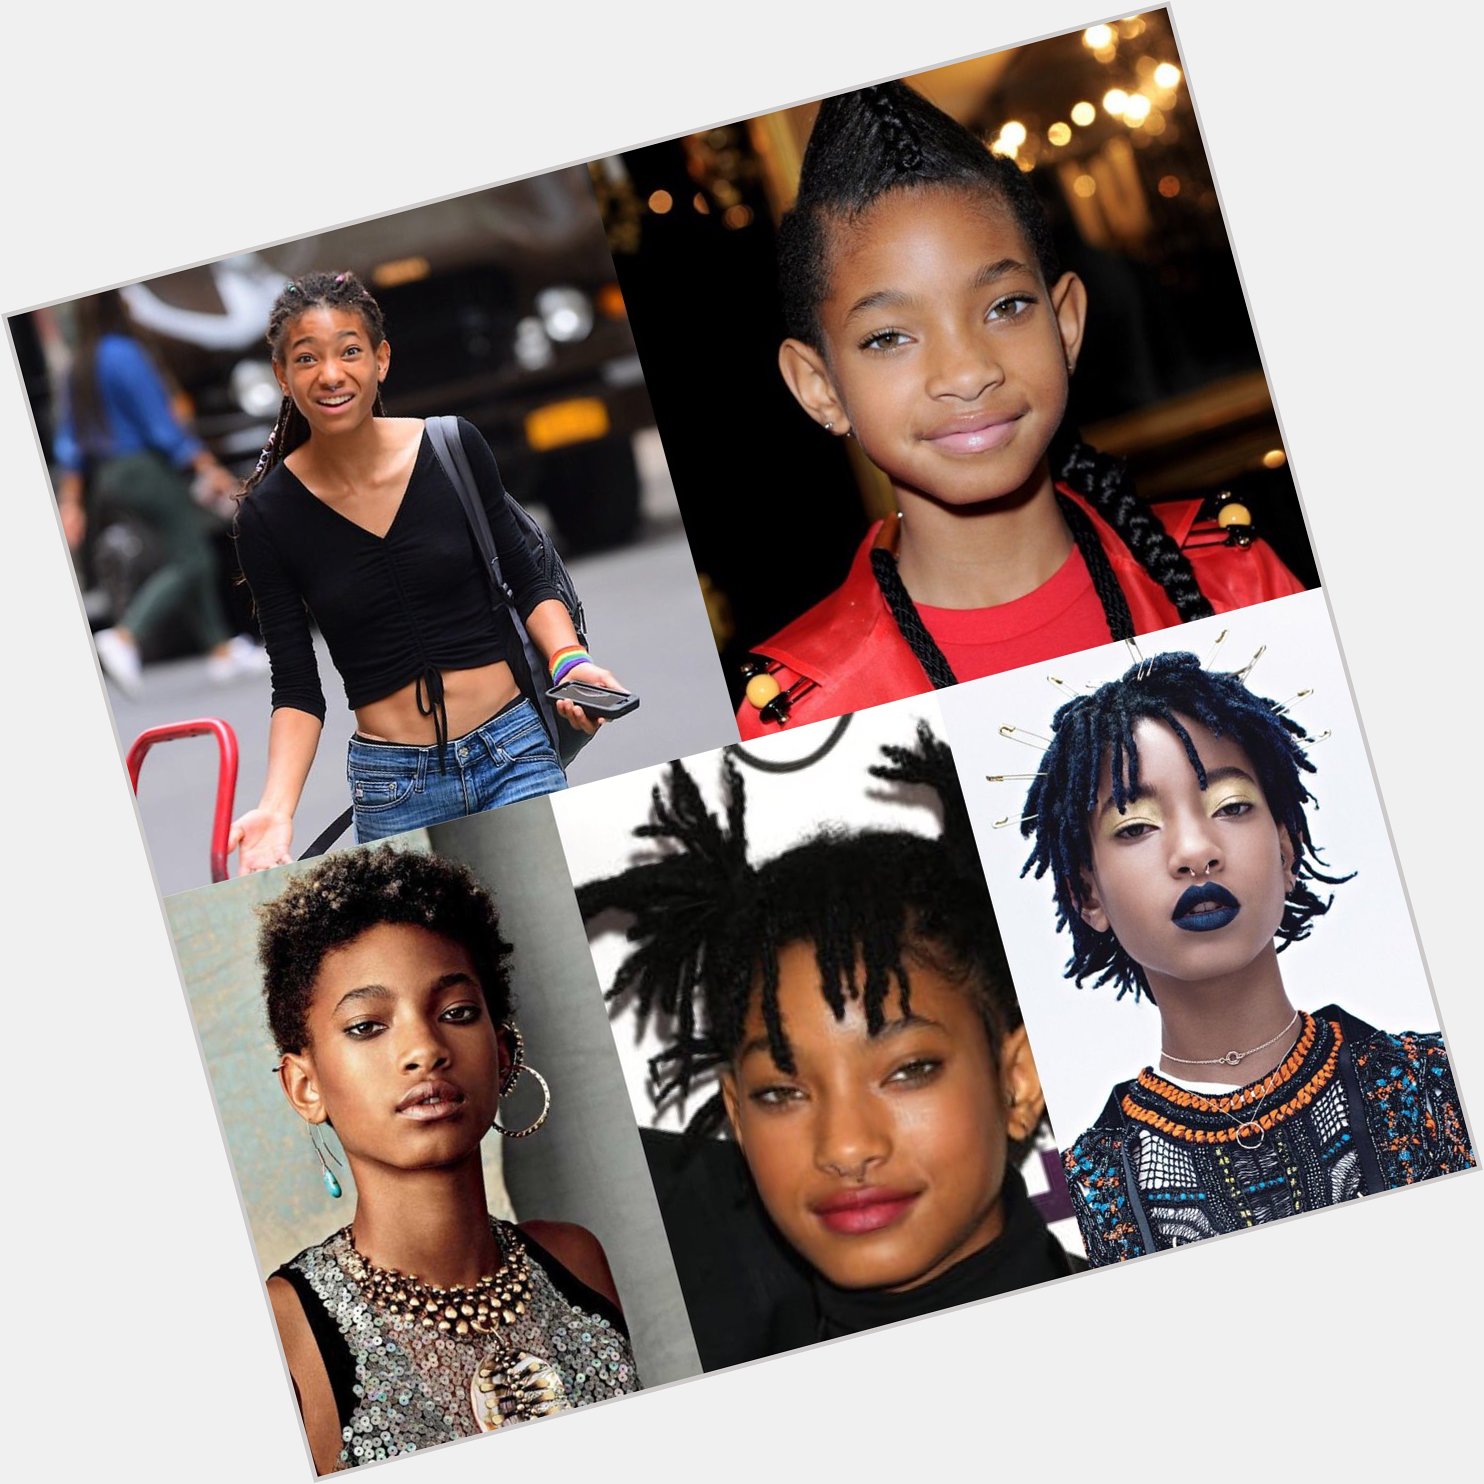 Happy 18 birthday to Willow Smith. Hope that she has a wonderful birthday.       